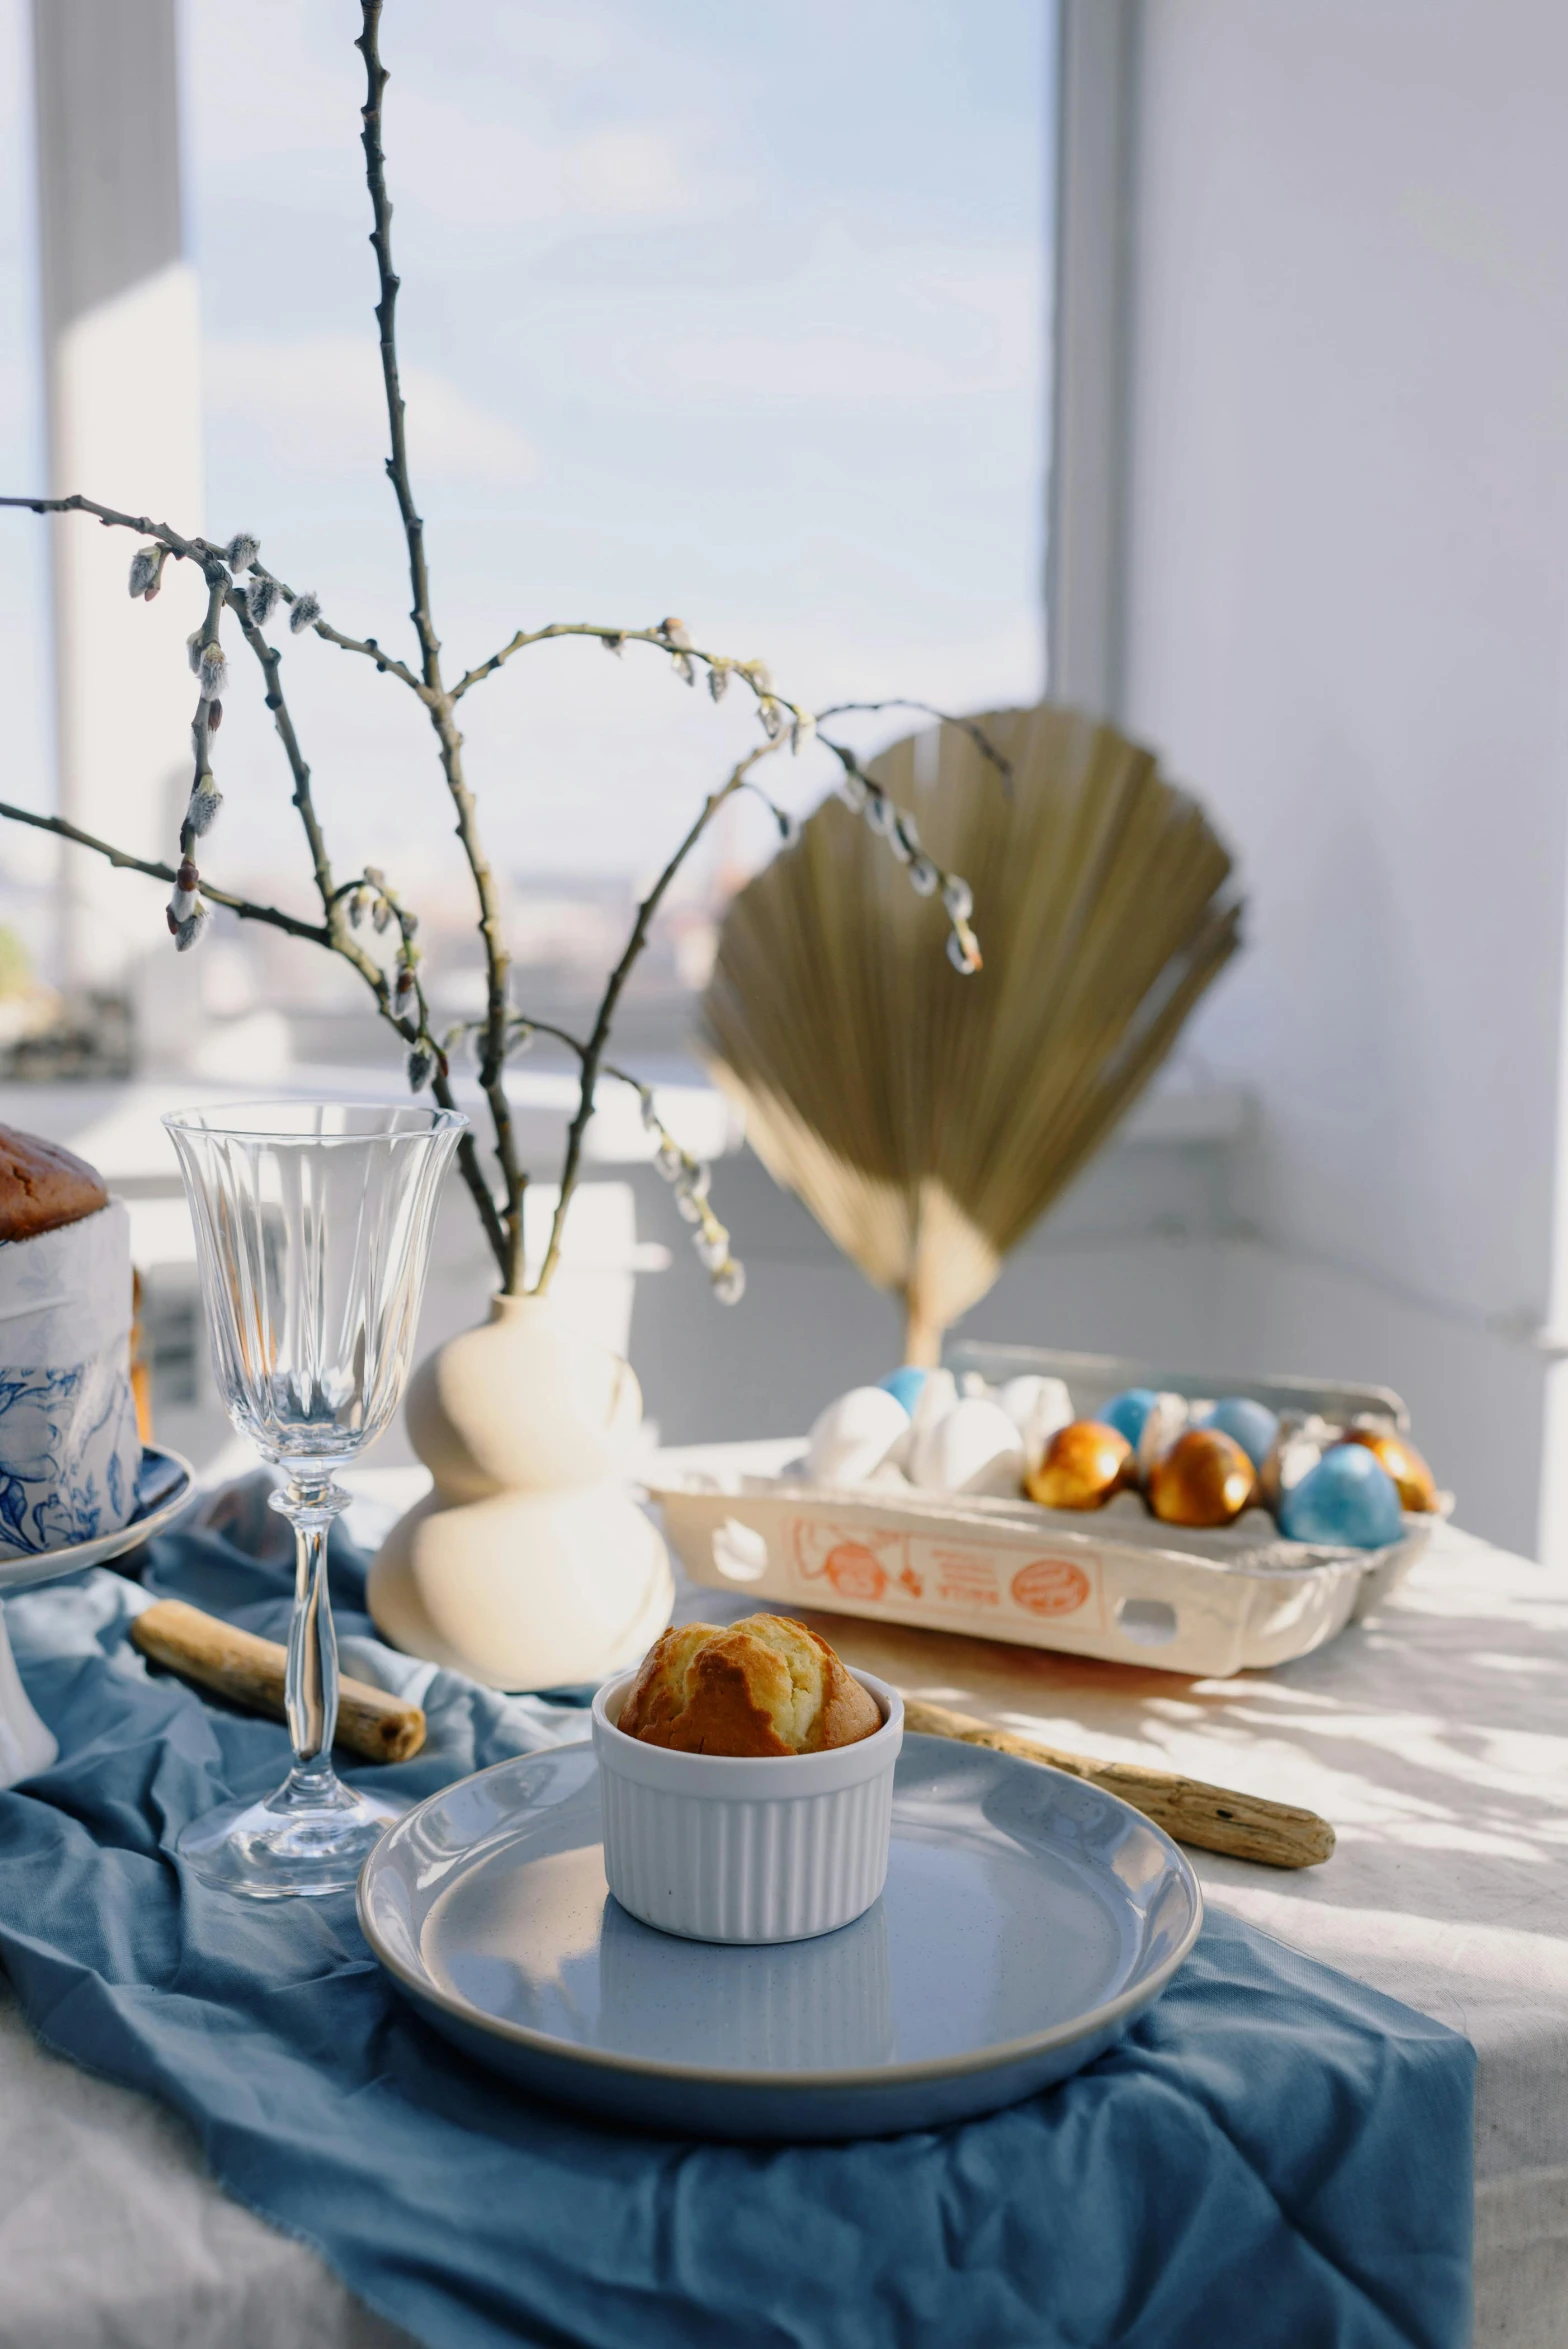 a close up of a plate of food on a table, easter, amber and blue color scheme, in a white boho style studio, seaview